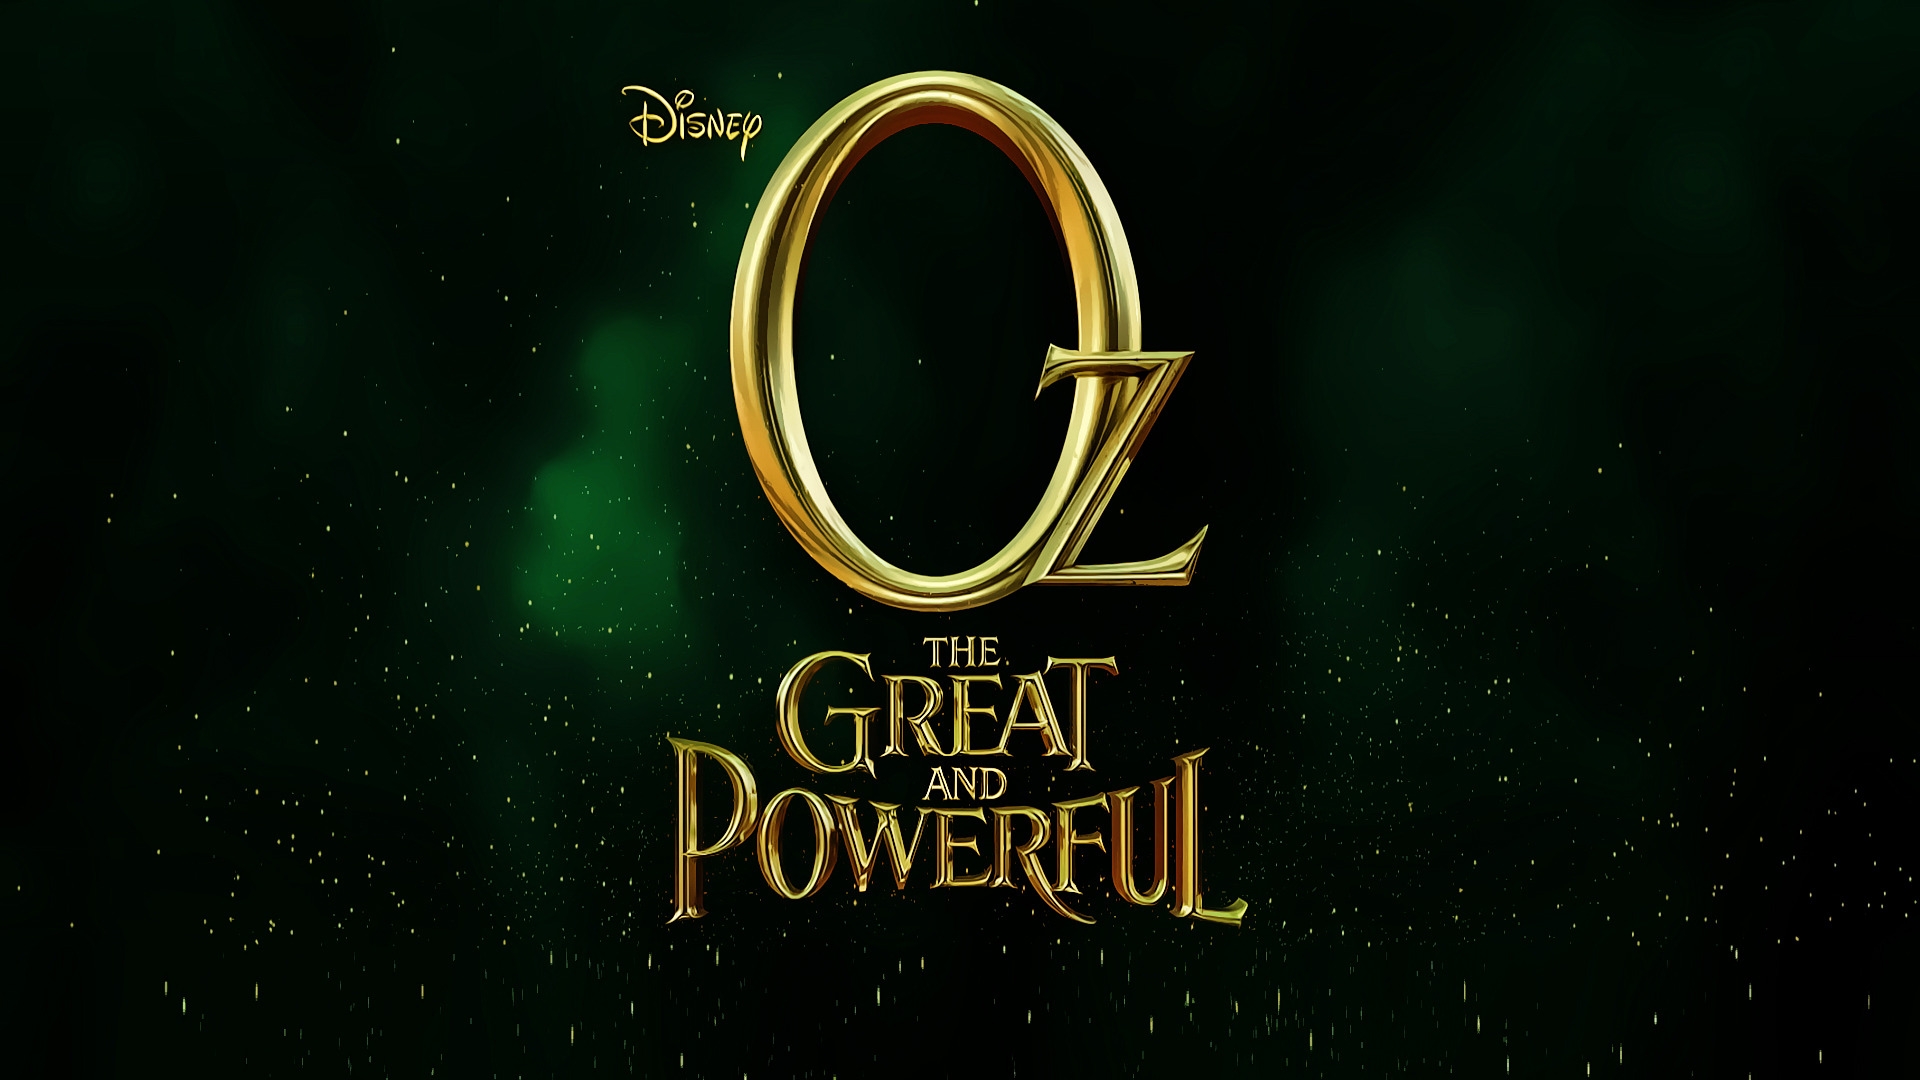 2013 Oz the Great and Powerful for 1920 x 1080 HDTV 1080p resolution